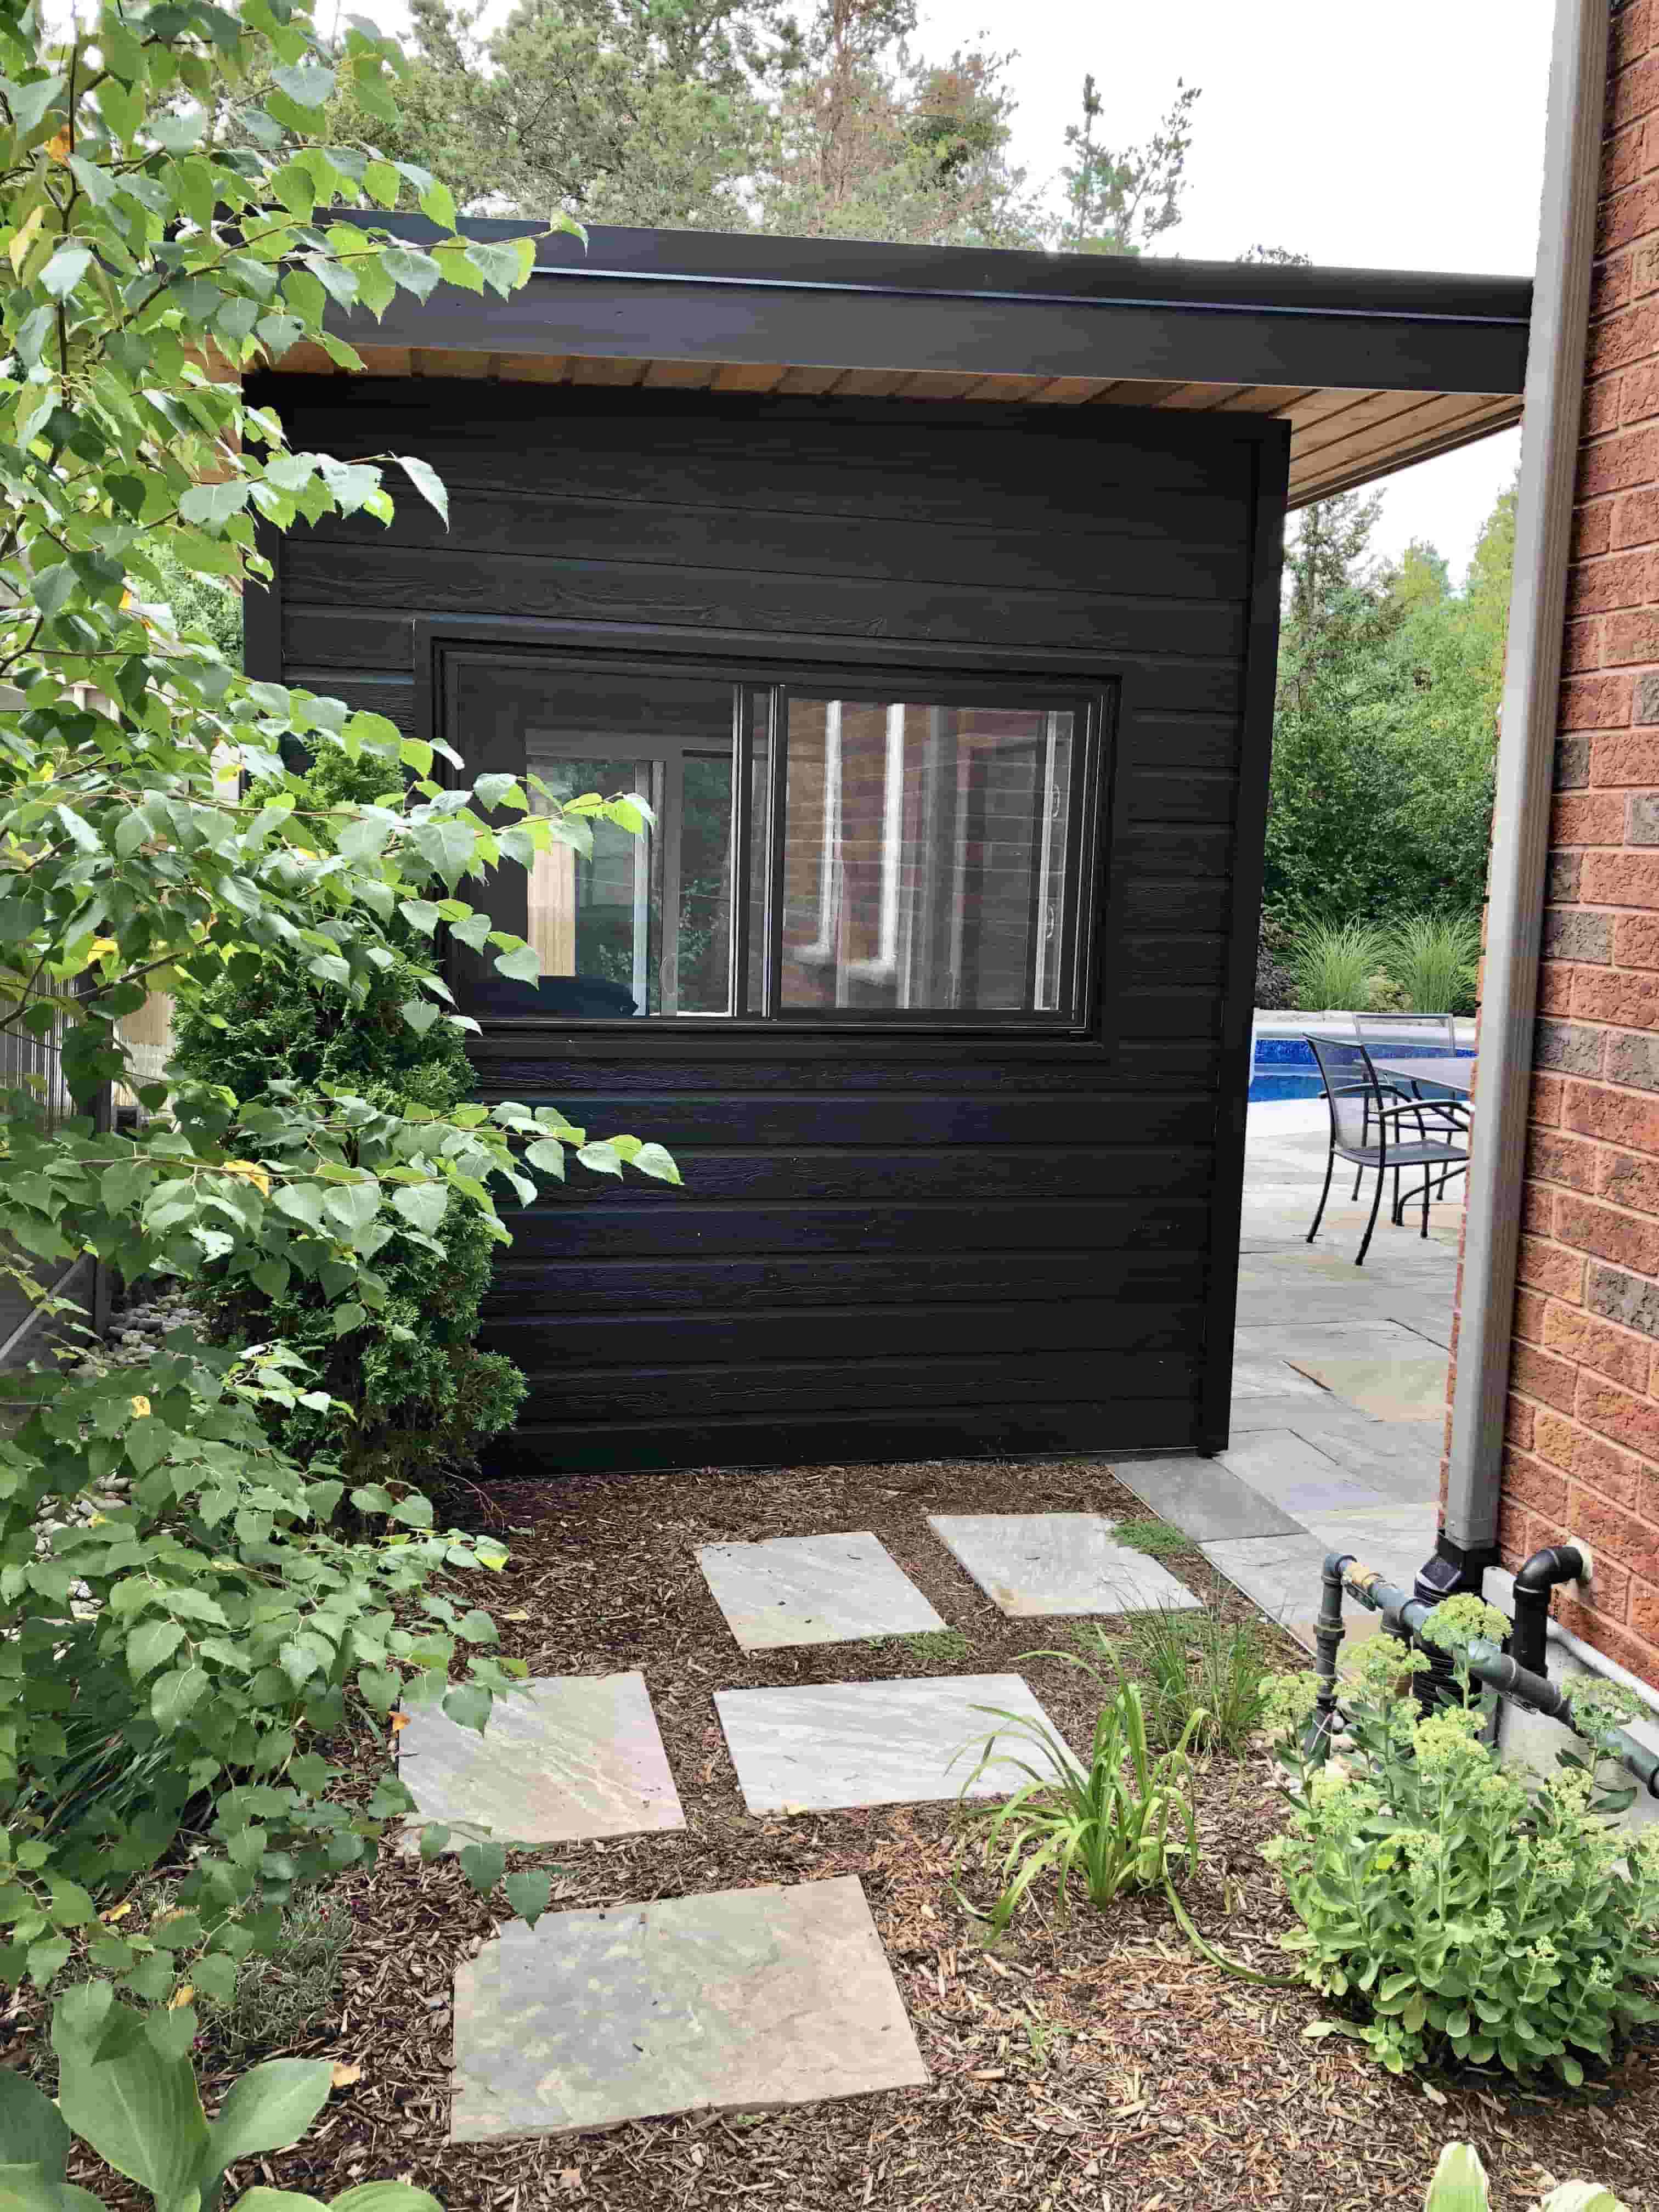 Canexel Verana 8x11 shed kit with Patio Doors in Guelph Ontario. ID number 221370-3